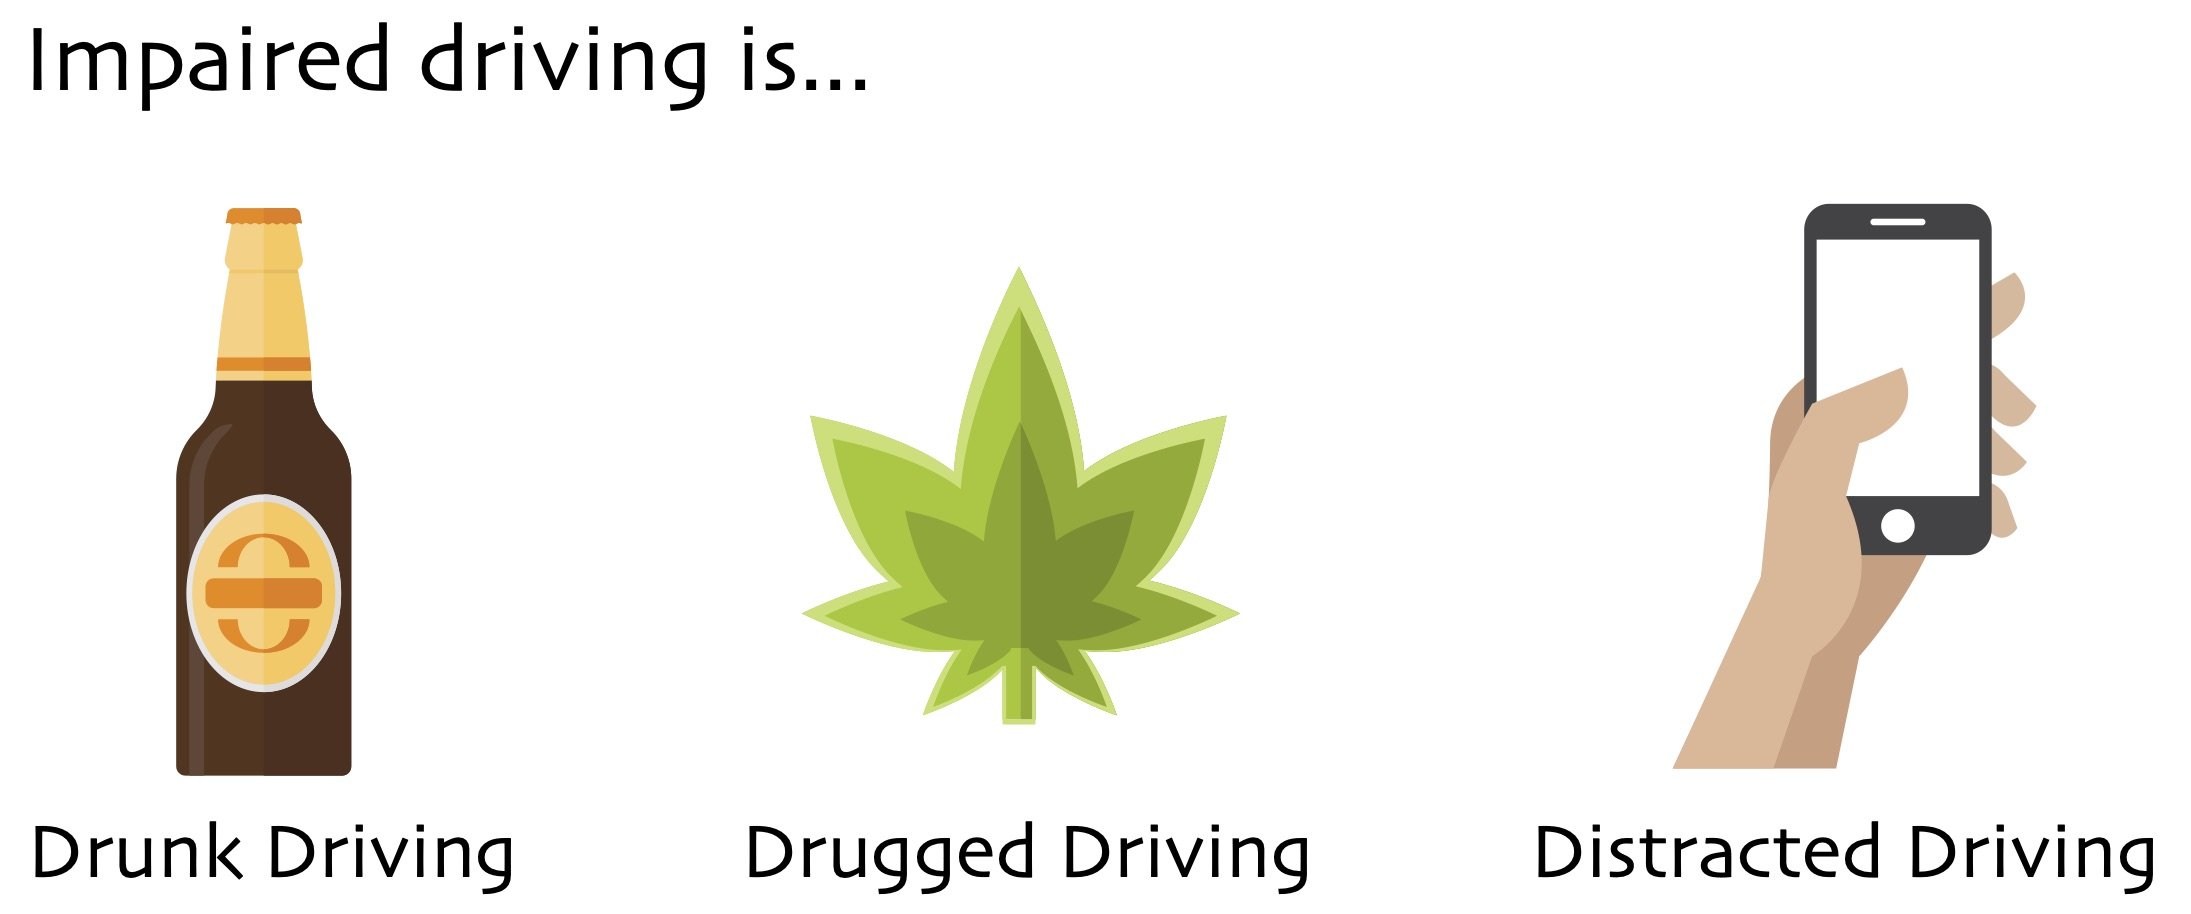 Impaired driving is the use of alcohol, drugs or other distractions while driving - Image